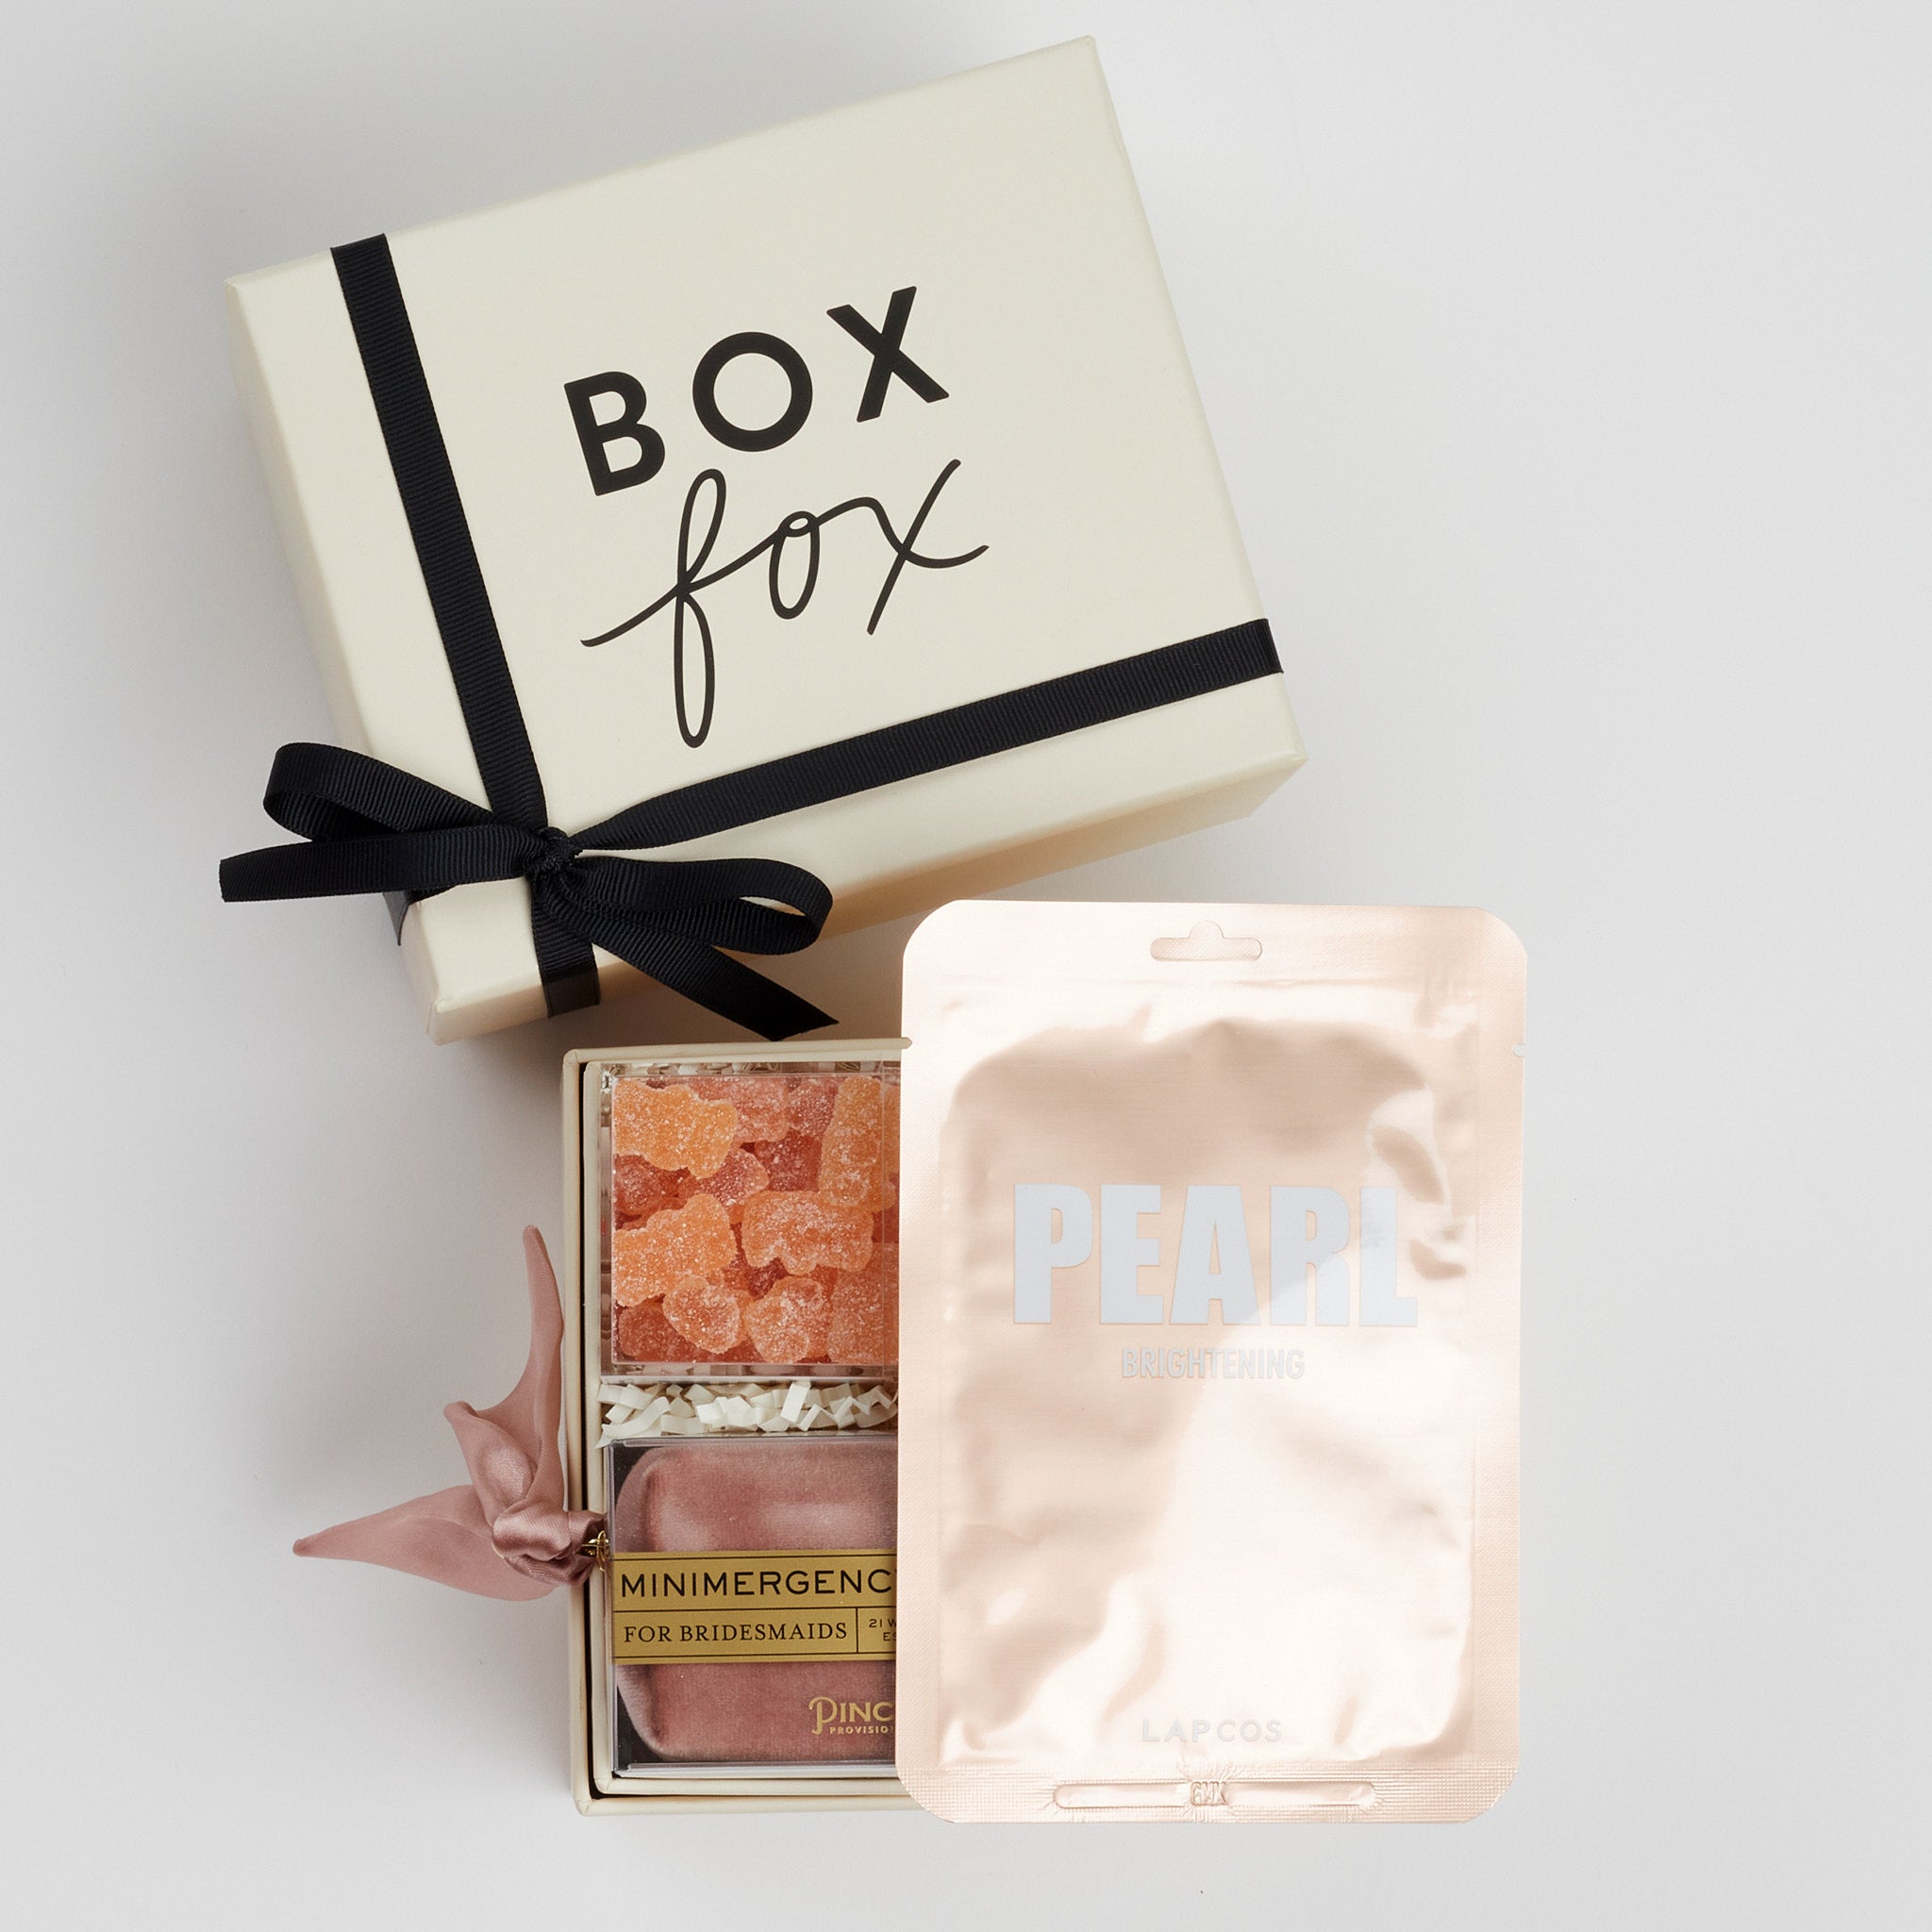 BOXFOX Bridesmaid Gift Box in Creme box with Lapcos Pearl Brightening Mask, Sugarfina sparkling pink gummies, Pinch Provisions pinch velvet bridesmaids essential kit